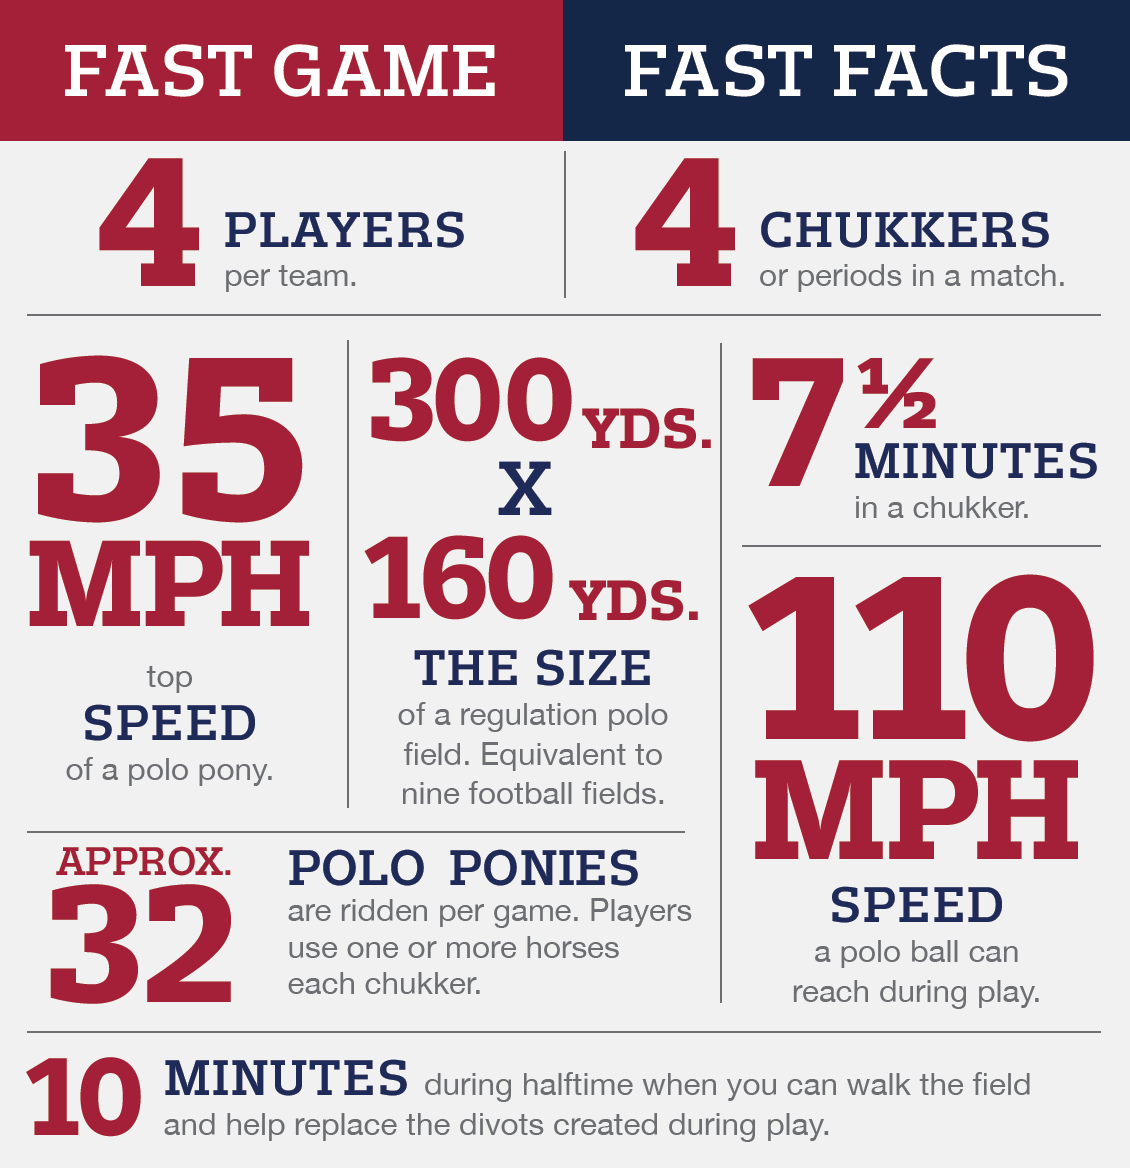 A fast game and fast facts poster for a football game